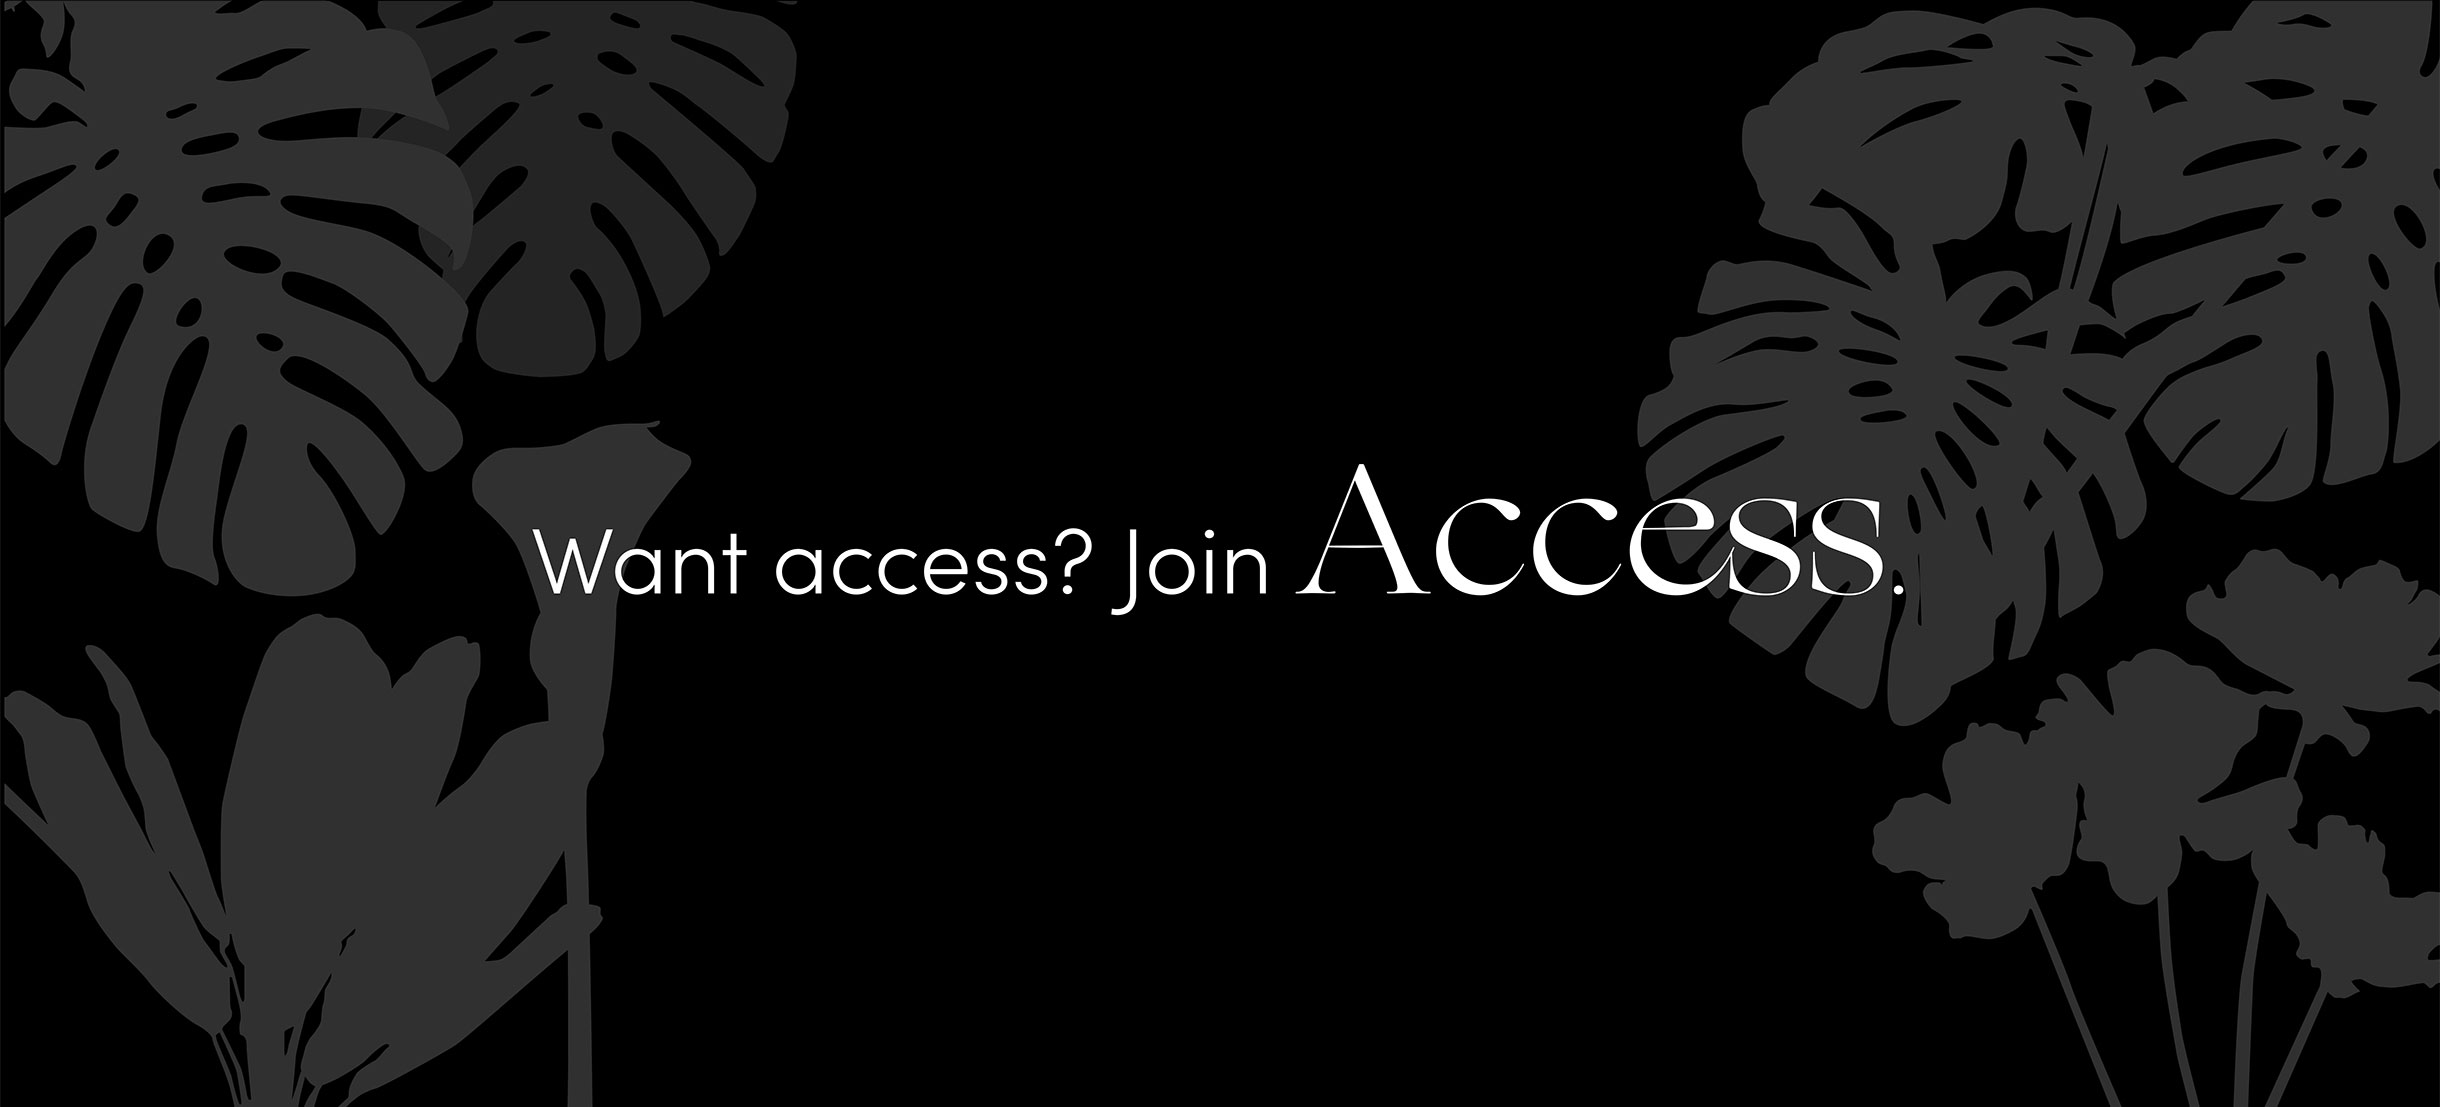 Want Access?